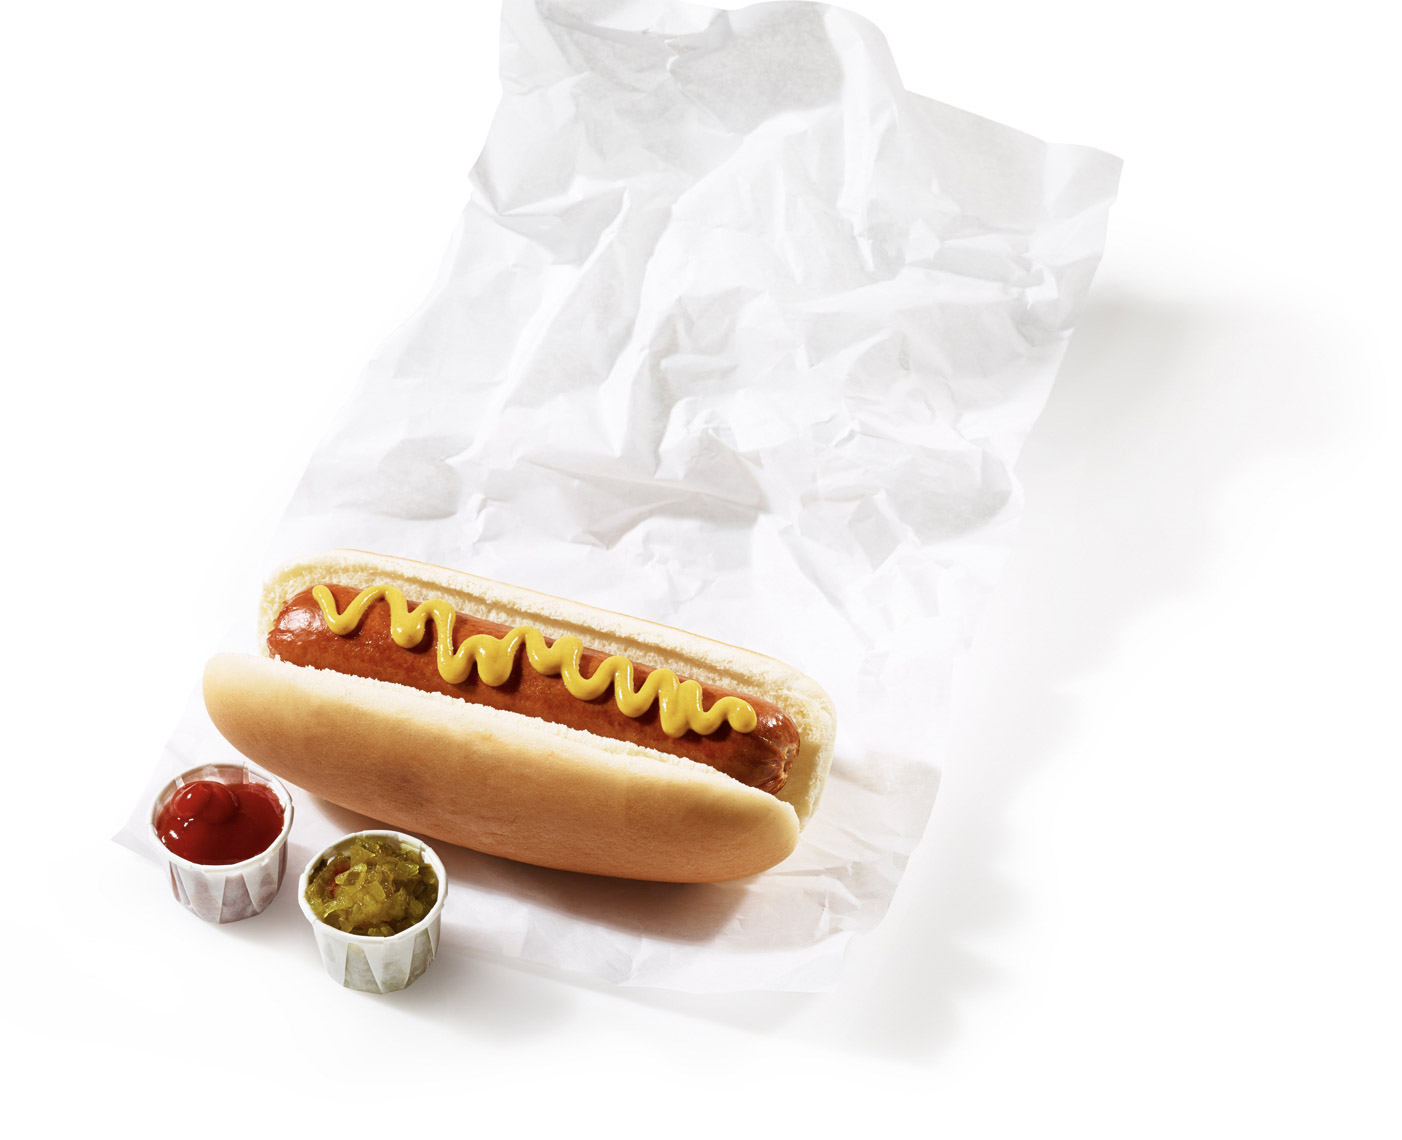 food stylist in San Fancisco - Hot dog with ketchup and Mustard for 49ers Levi